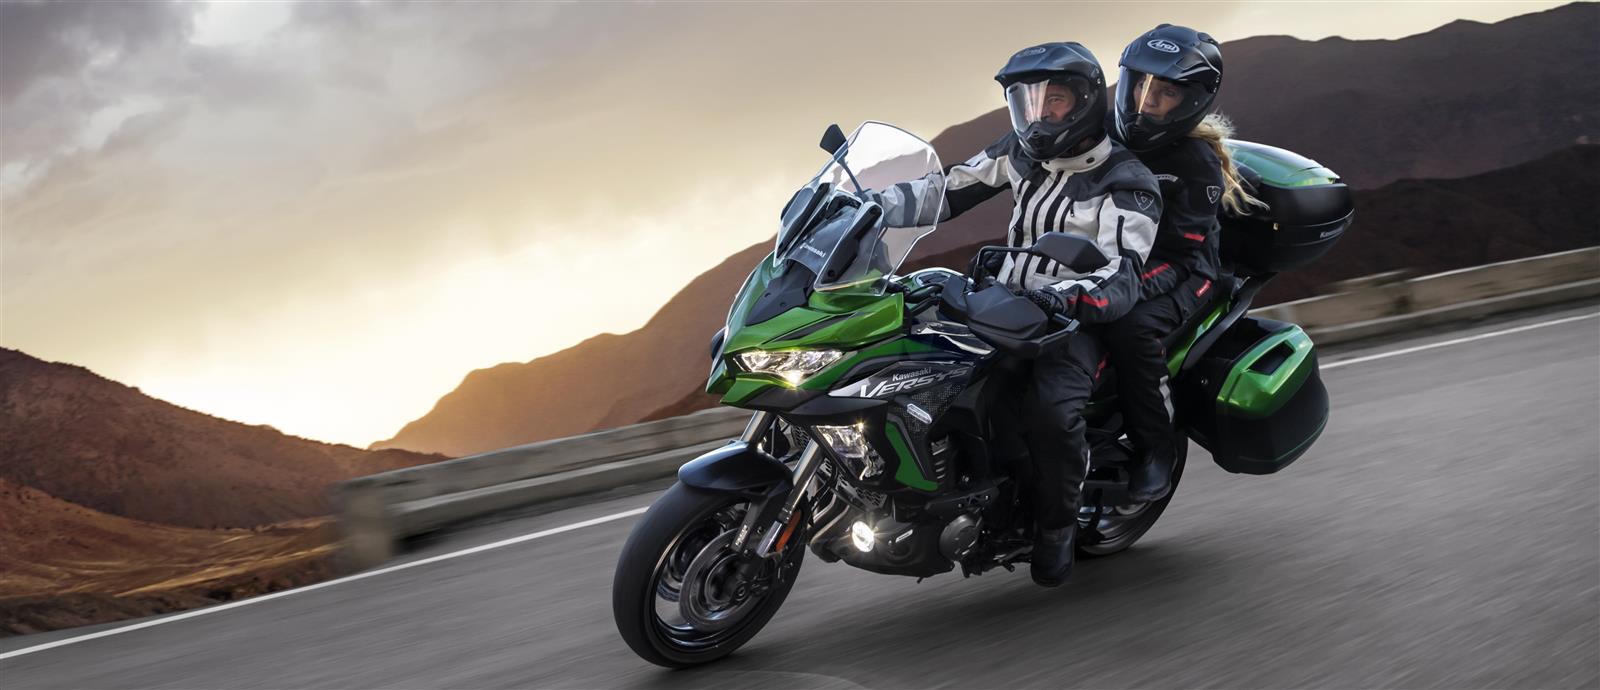 New 2021 Kawasaki Versys 1000 S Announced & SE Updated 